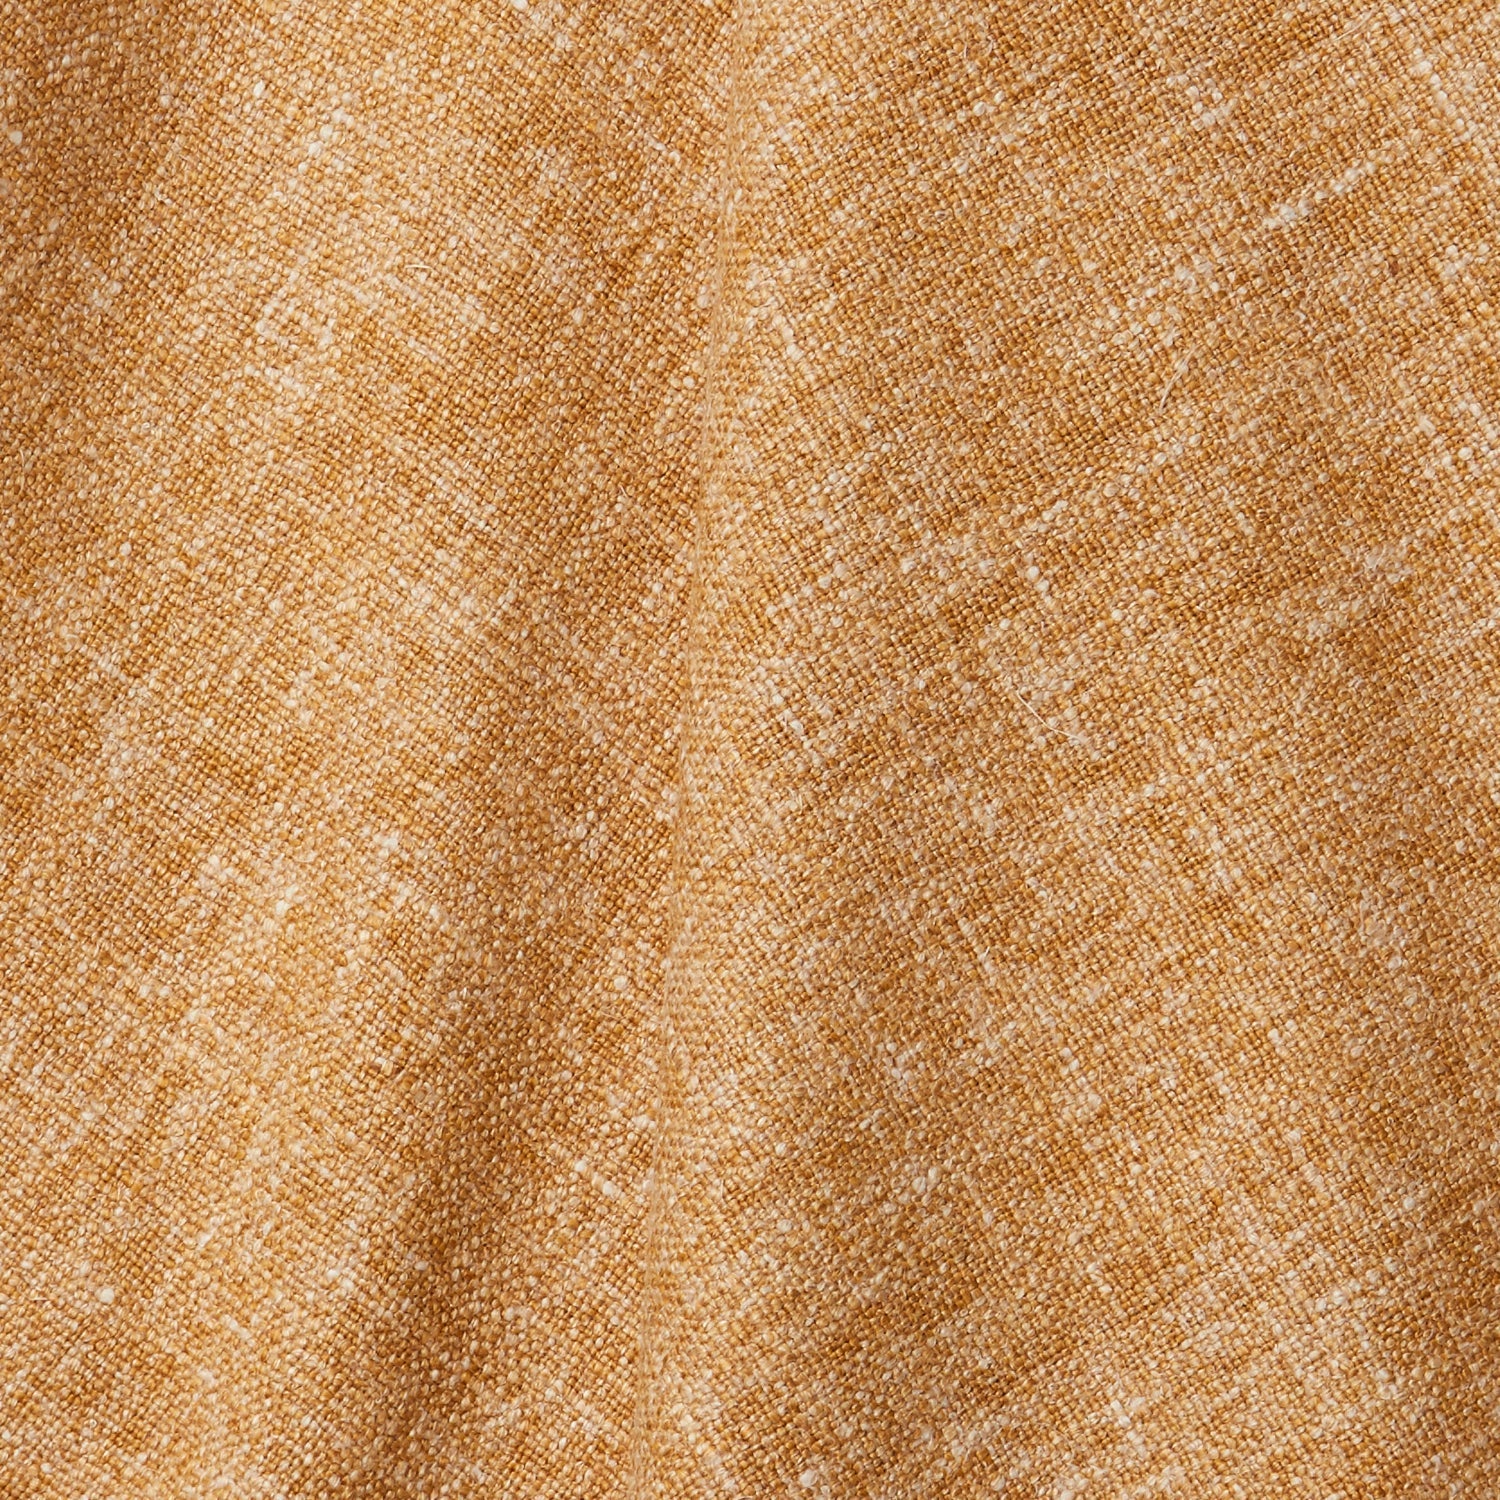 A draped swatch of blended linen fabric in a mottled mustard color.